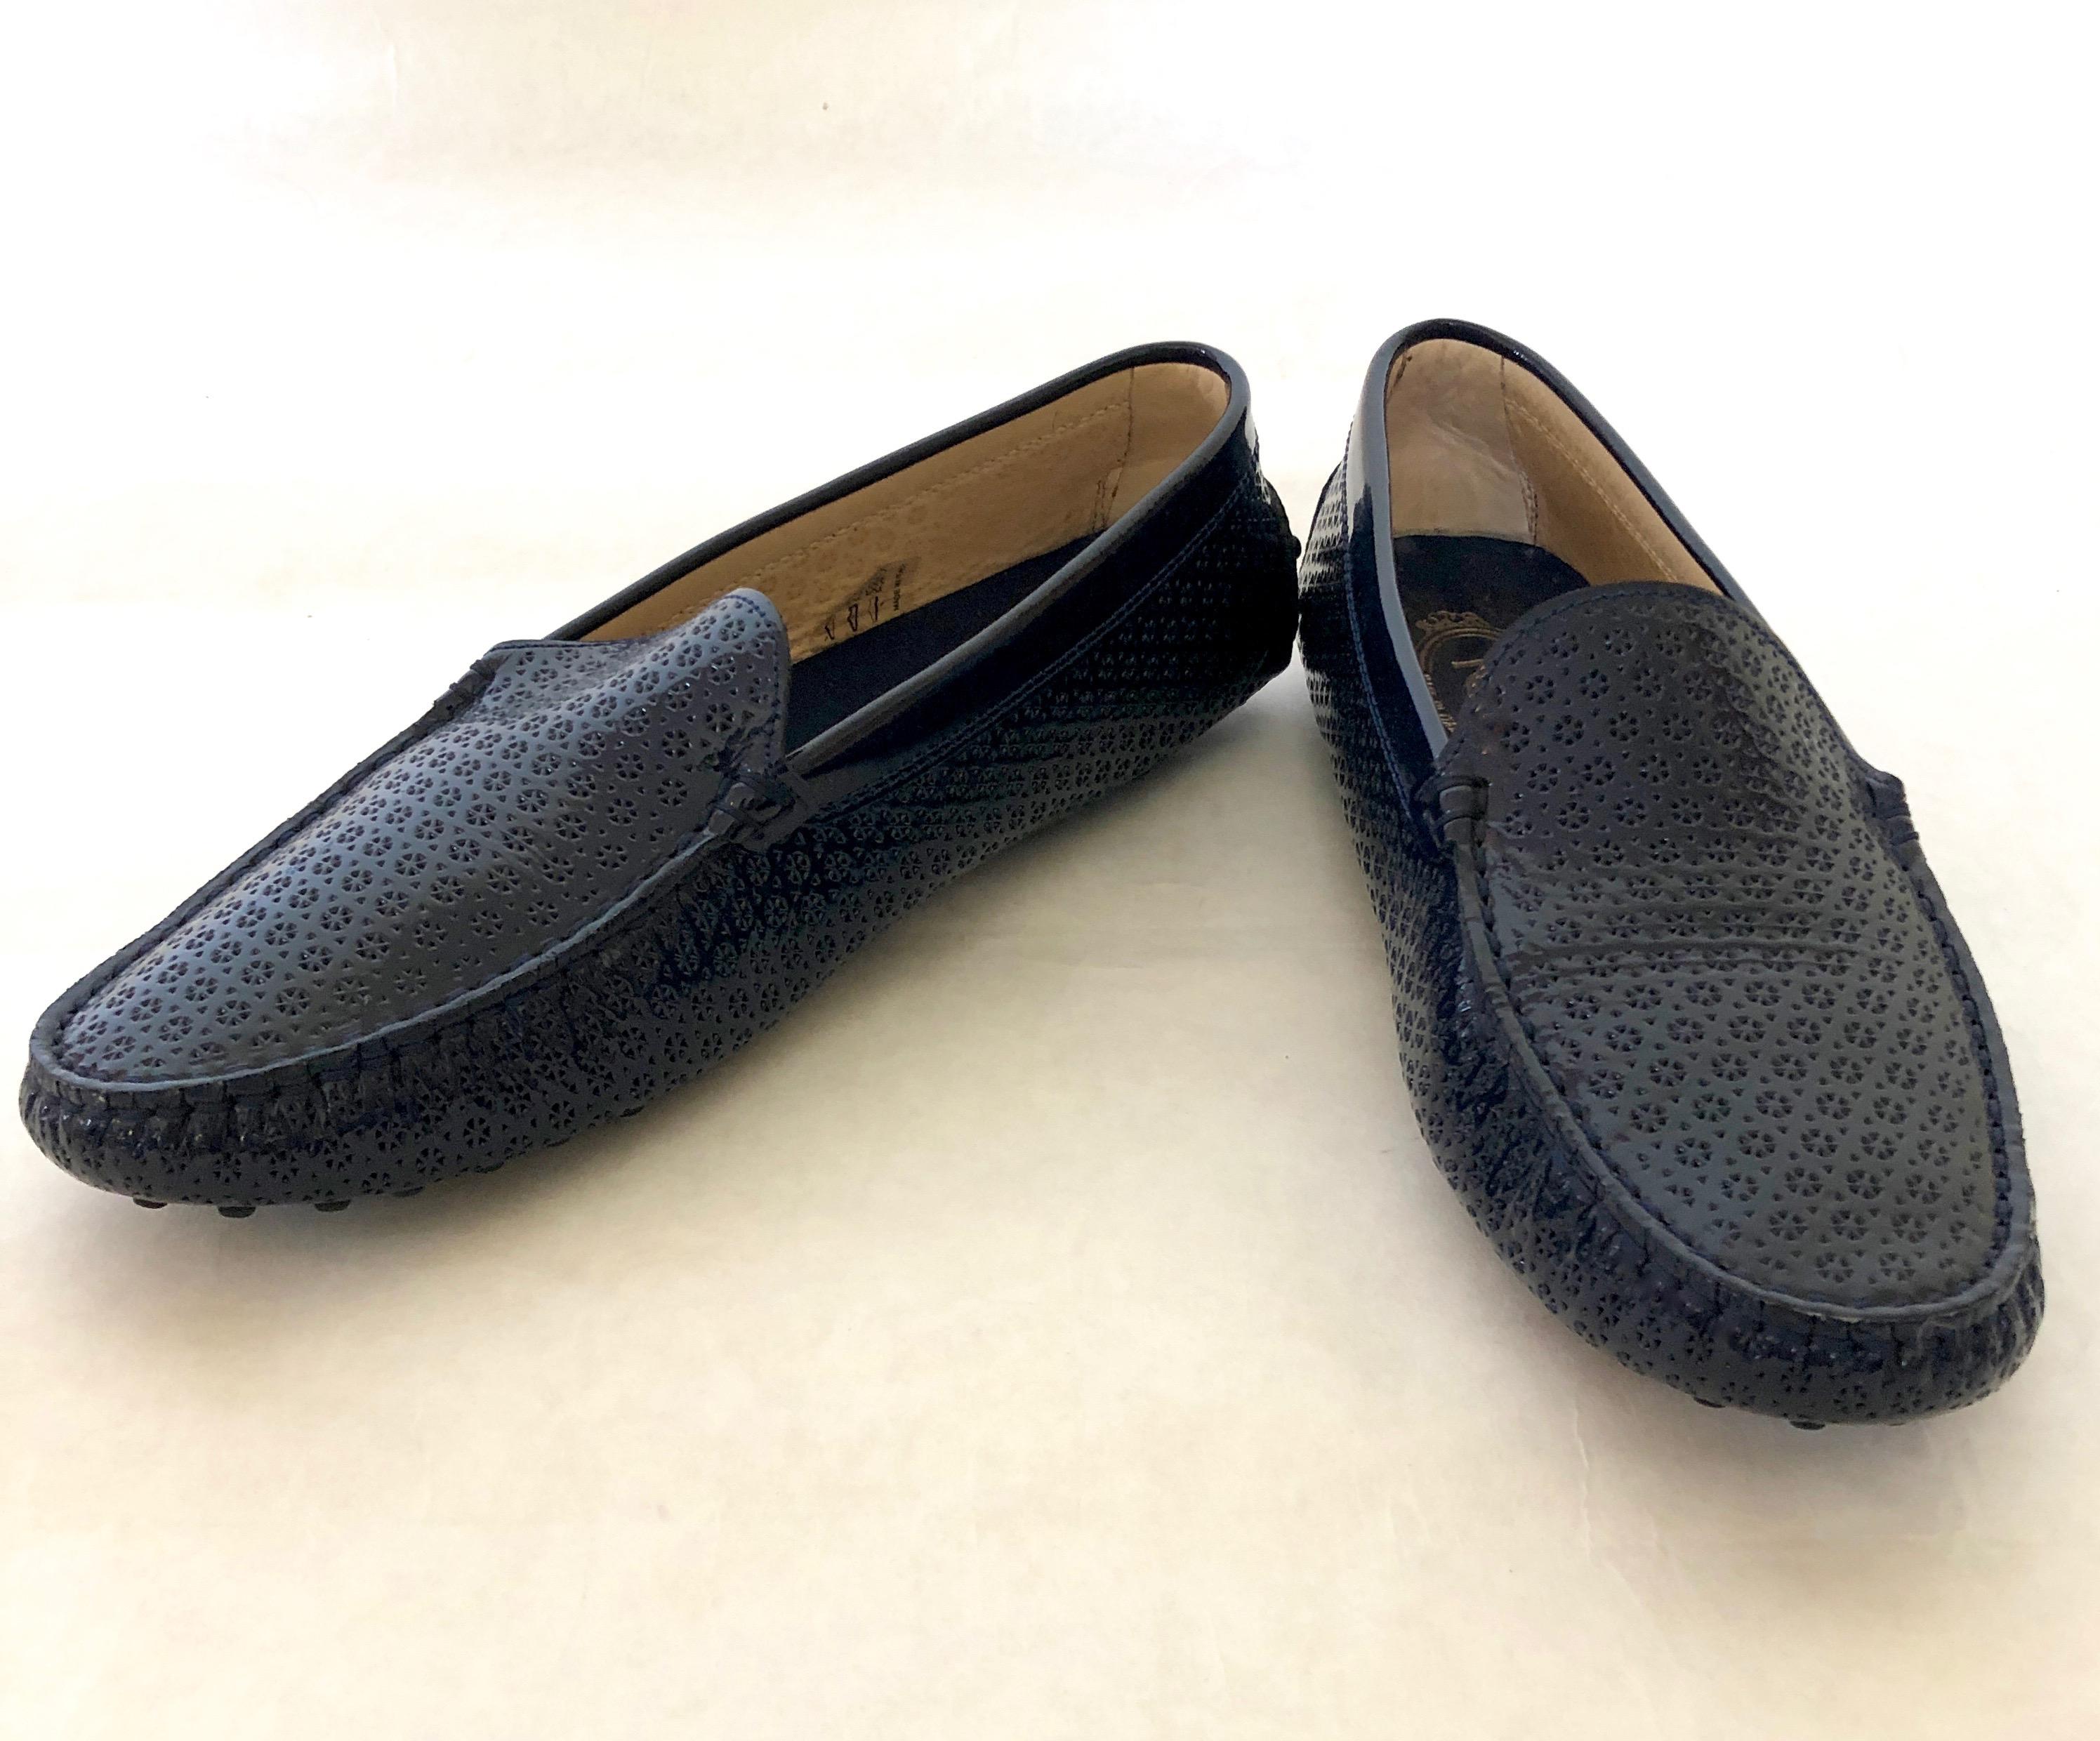 Make:  Tod's
Place of Manufacture:  Italy
Size:  39
Color:  Navy Blue
Materials:  Patent leather and rubber
Style:  Floral pattern perforated navy blue patent leather driver / moccasin with the Tod's pebbled no slip rubber sole and back of